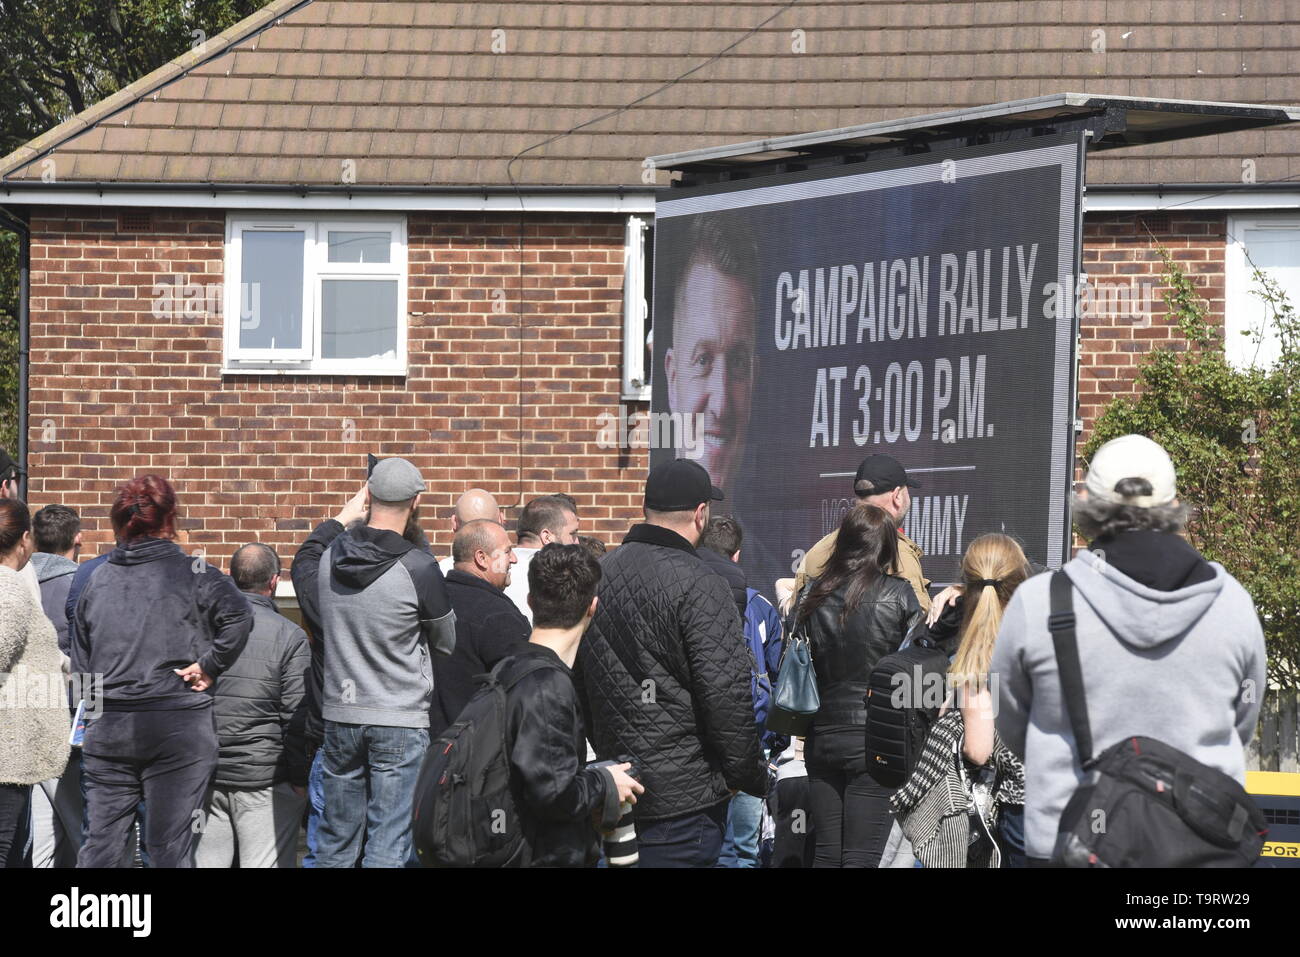 Supporters of Tommy Robinson, who is campaigning in Bootle, Liverpool ahead of this weeks European Elections.  Police kept supporters and counter-demonstrators apart but clashed with counter-demonstrators ahead of Tommy Robinson's arrival. Credit David J Colbran Stock Photo